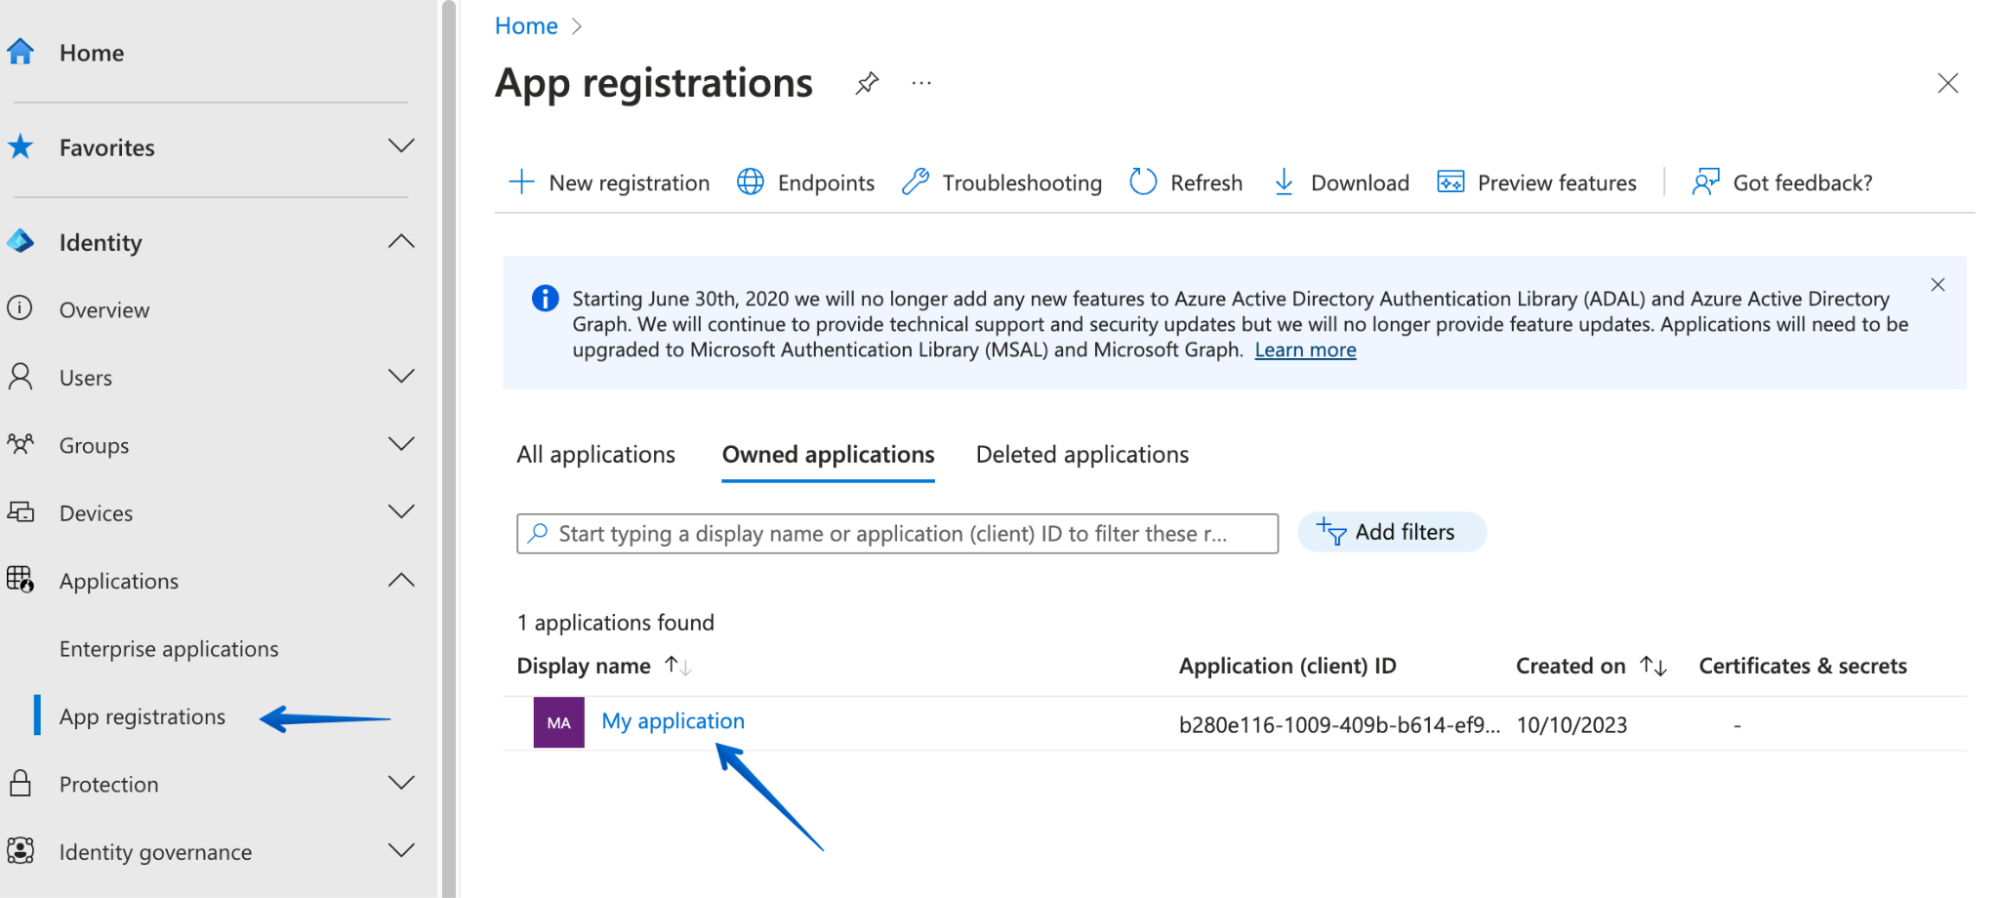 Selecting App registrations and pressing the name of the newly created app